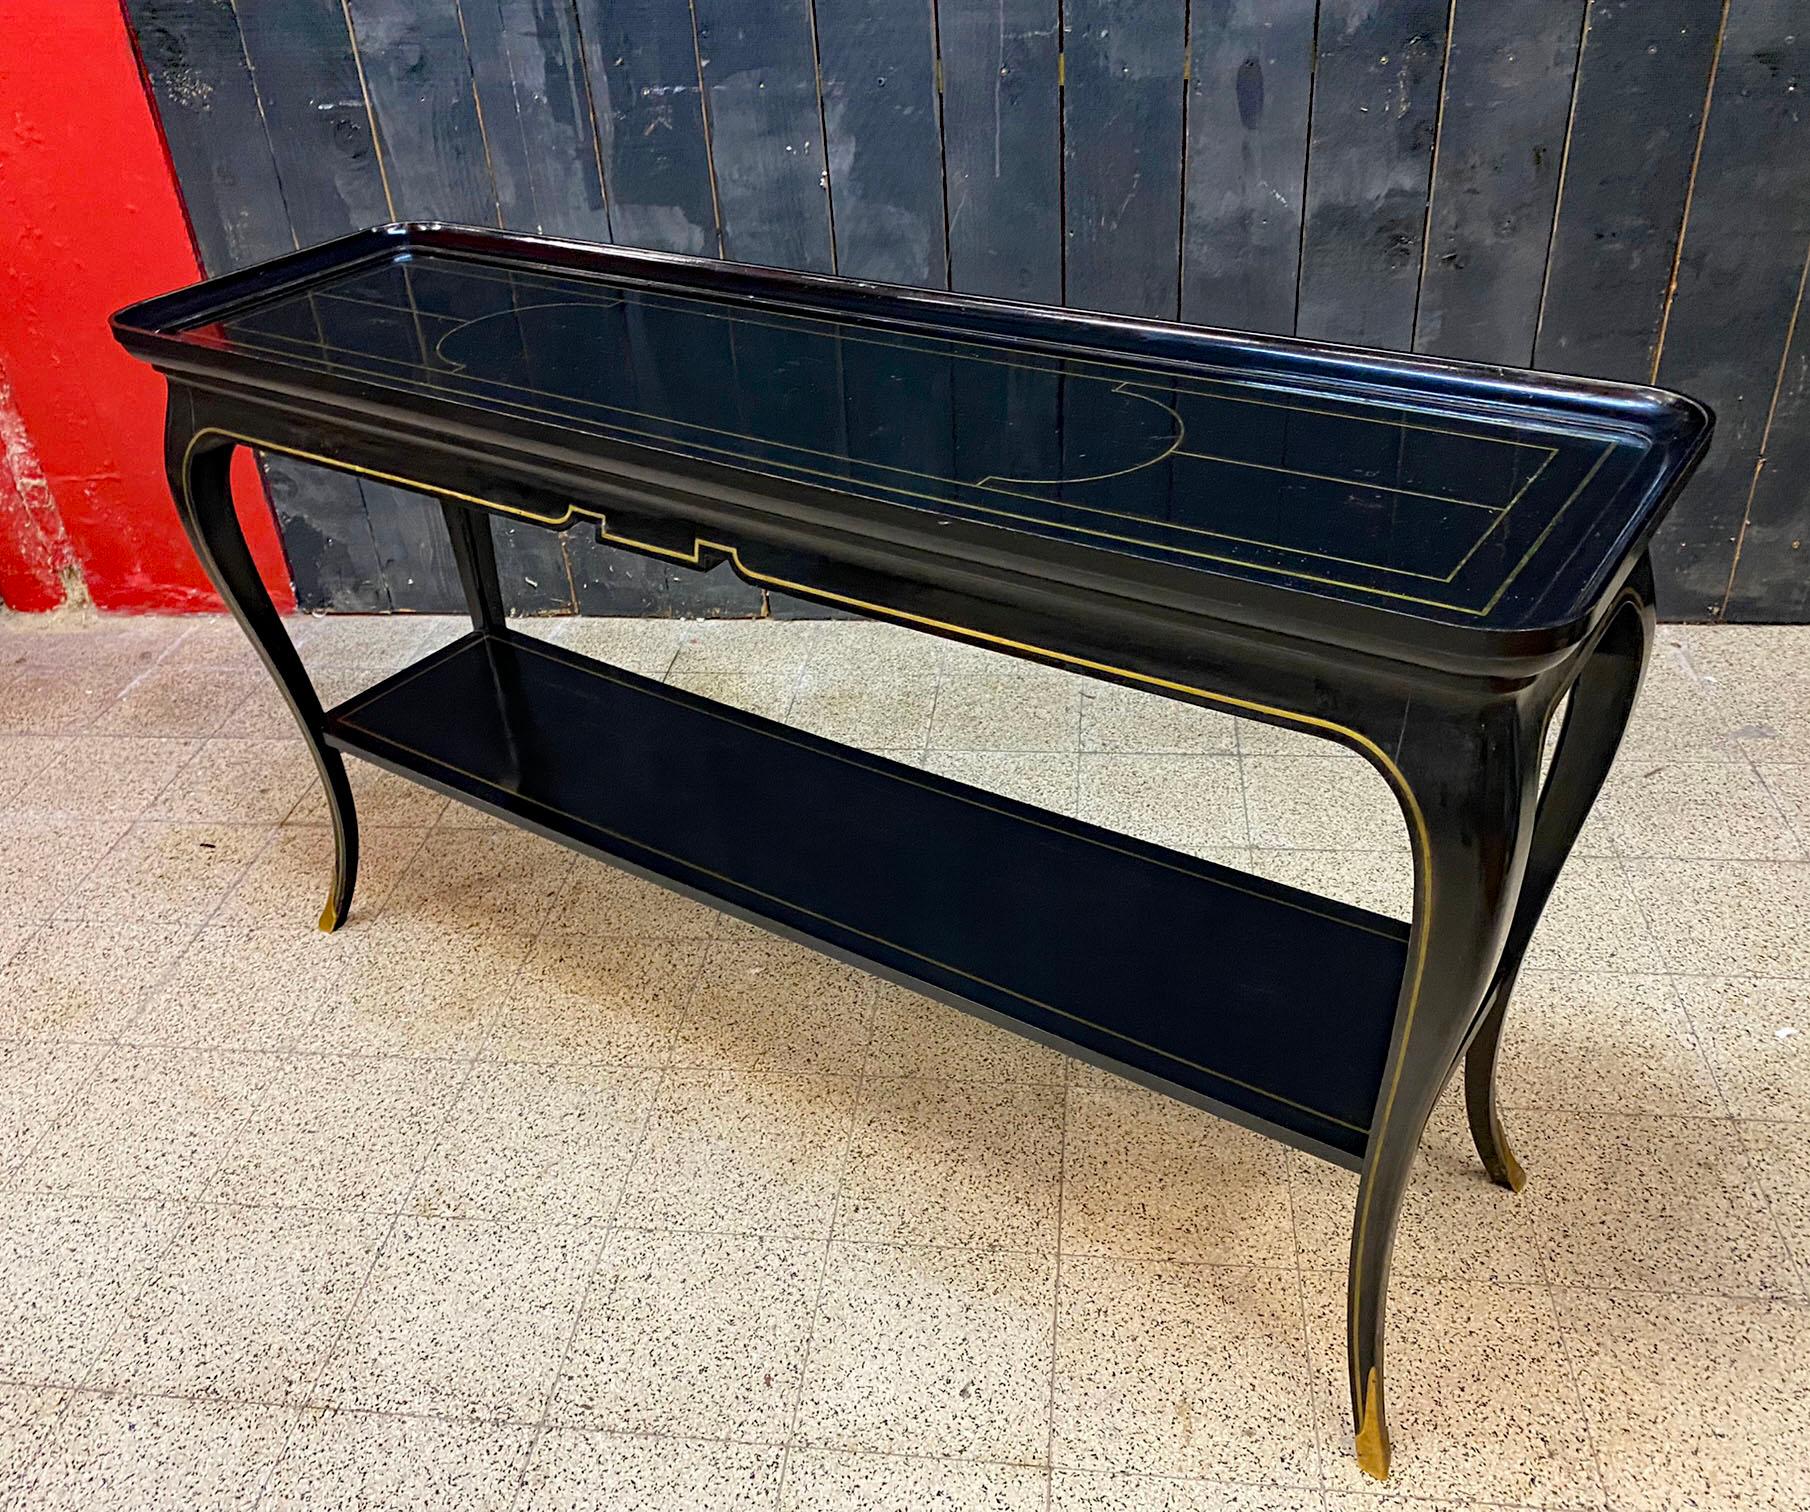 Maison Jansen, exceptional neo classic console table in blackened pearwood and brass fillet circa 1950/1960
Another console of the same model, but larger is also offered for sale in another ad.
Prestigious provenance.